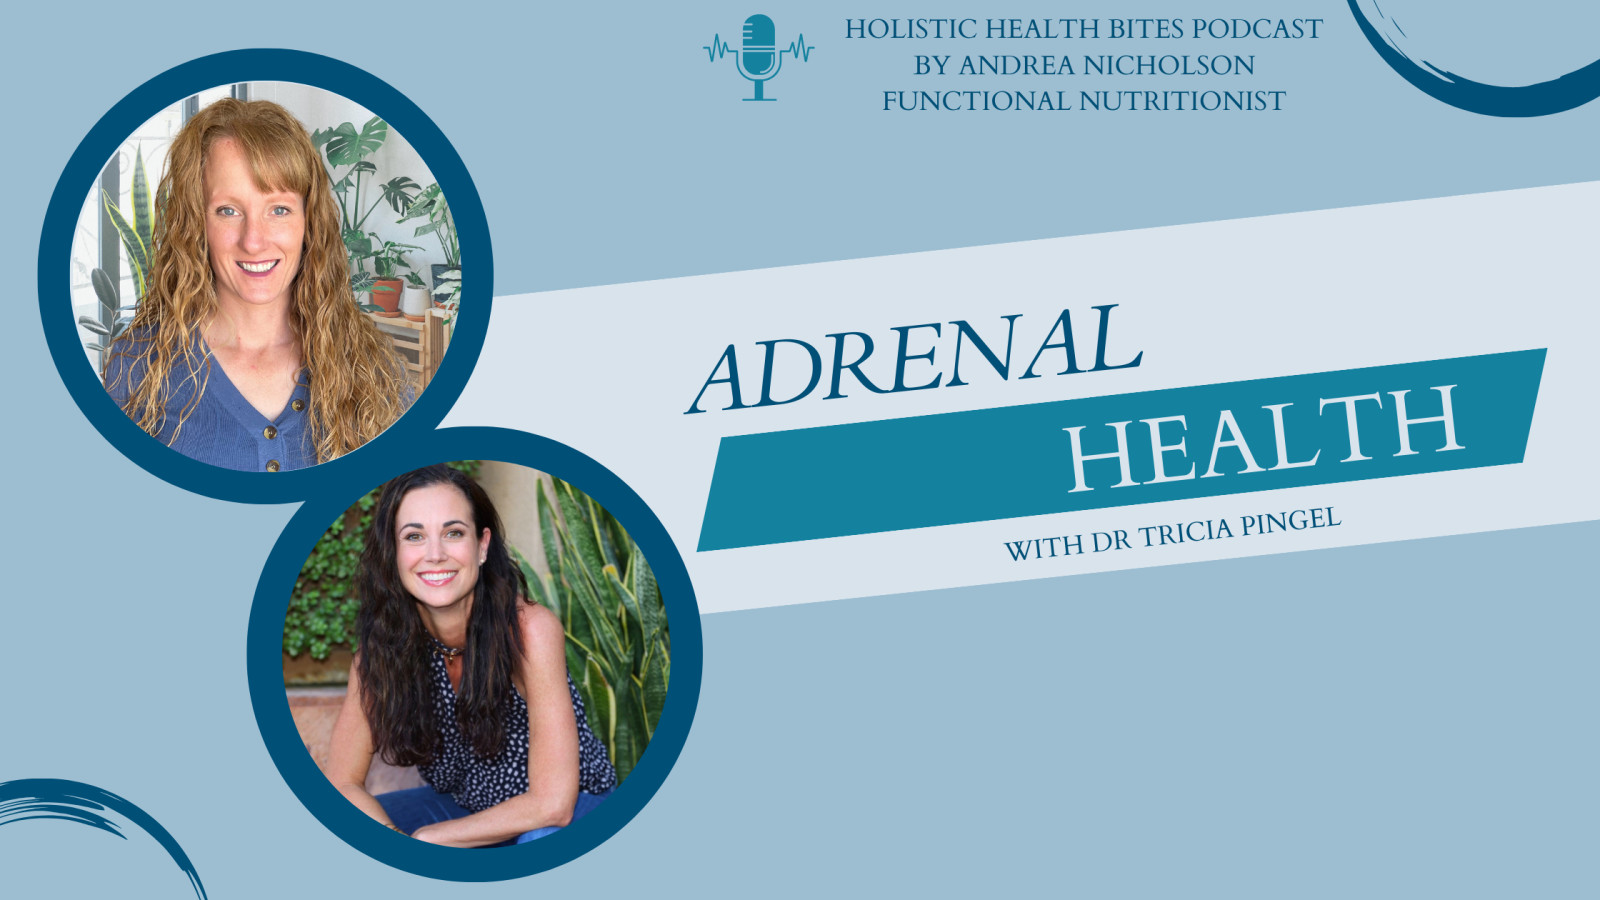 Adrenal Health with Dr Tricia Pingel